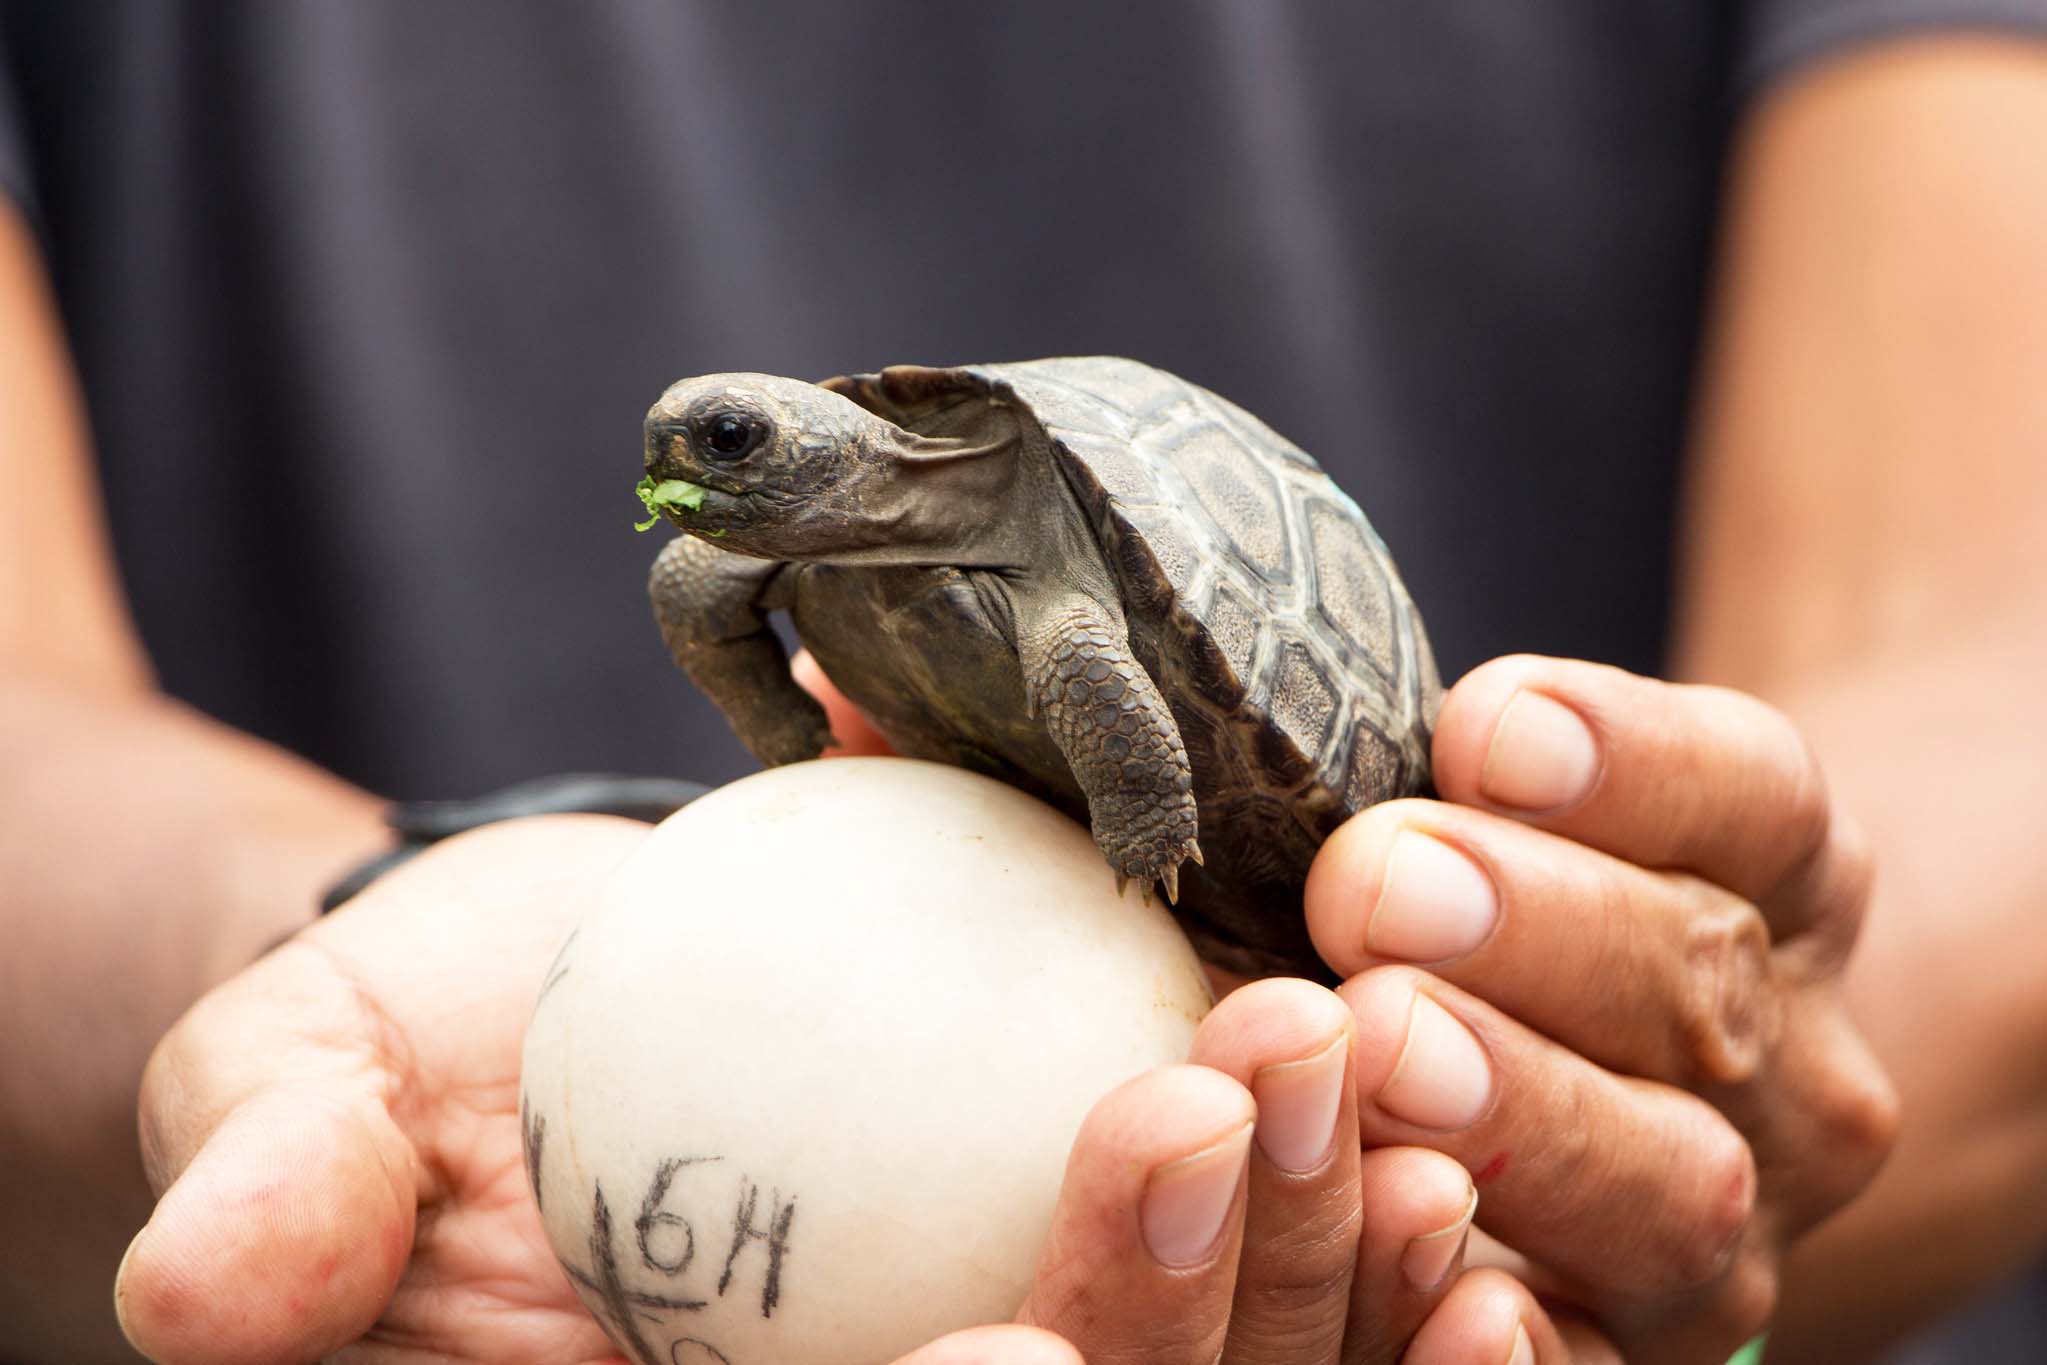 A person's hands holding an egg and a baby giant tortoise